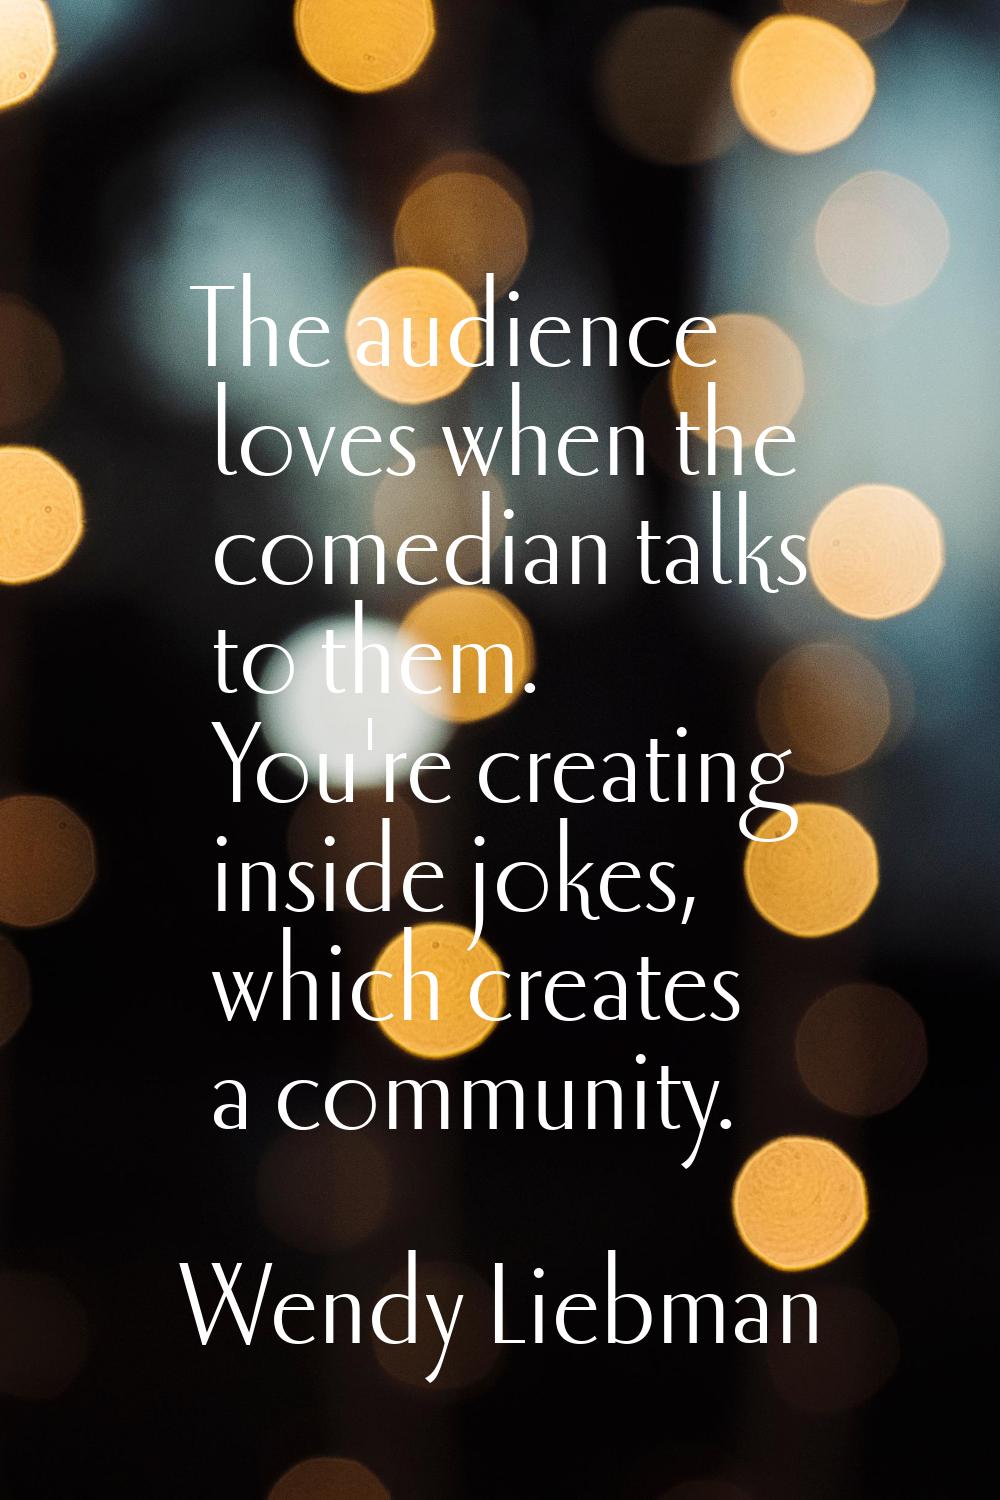 The audience loves when the comedian talks to them. You're creating inside jokes, which creates a c